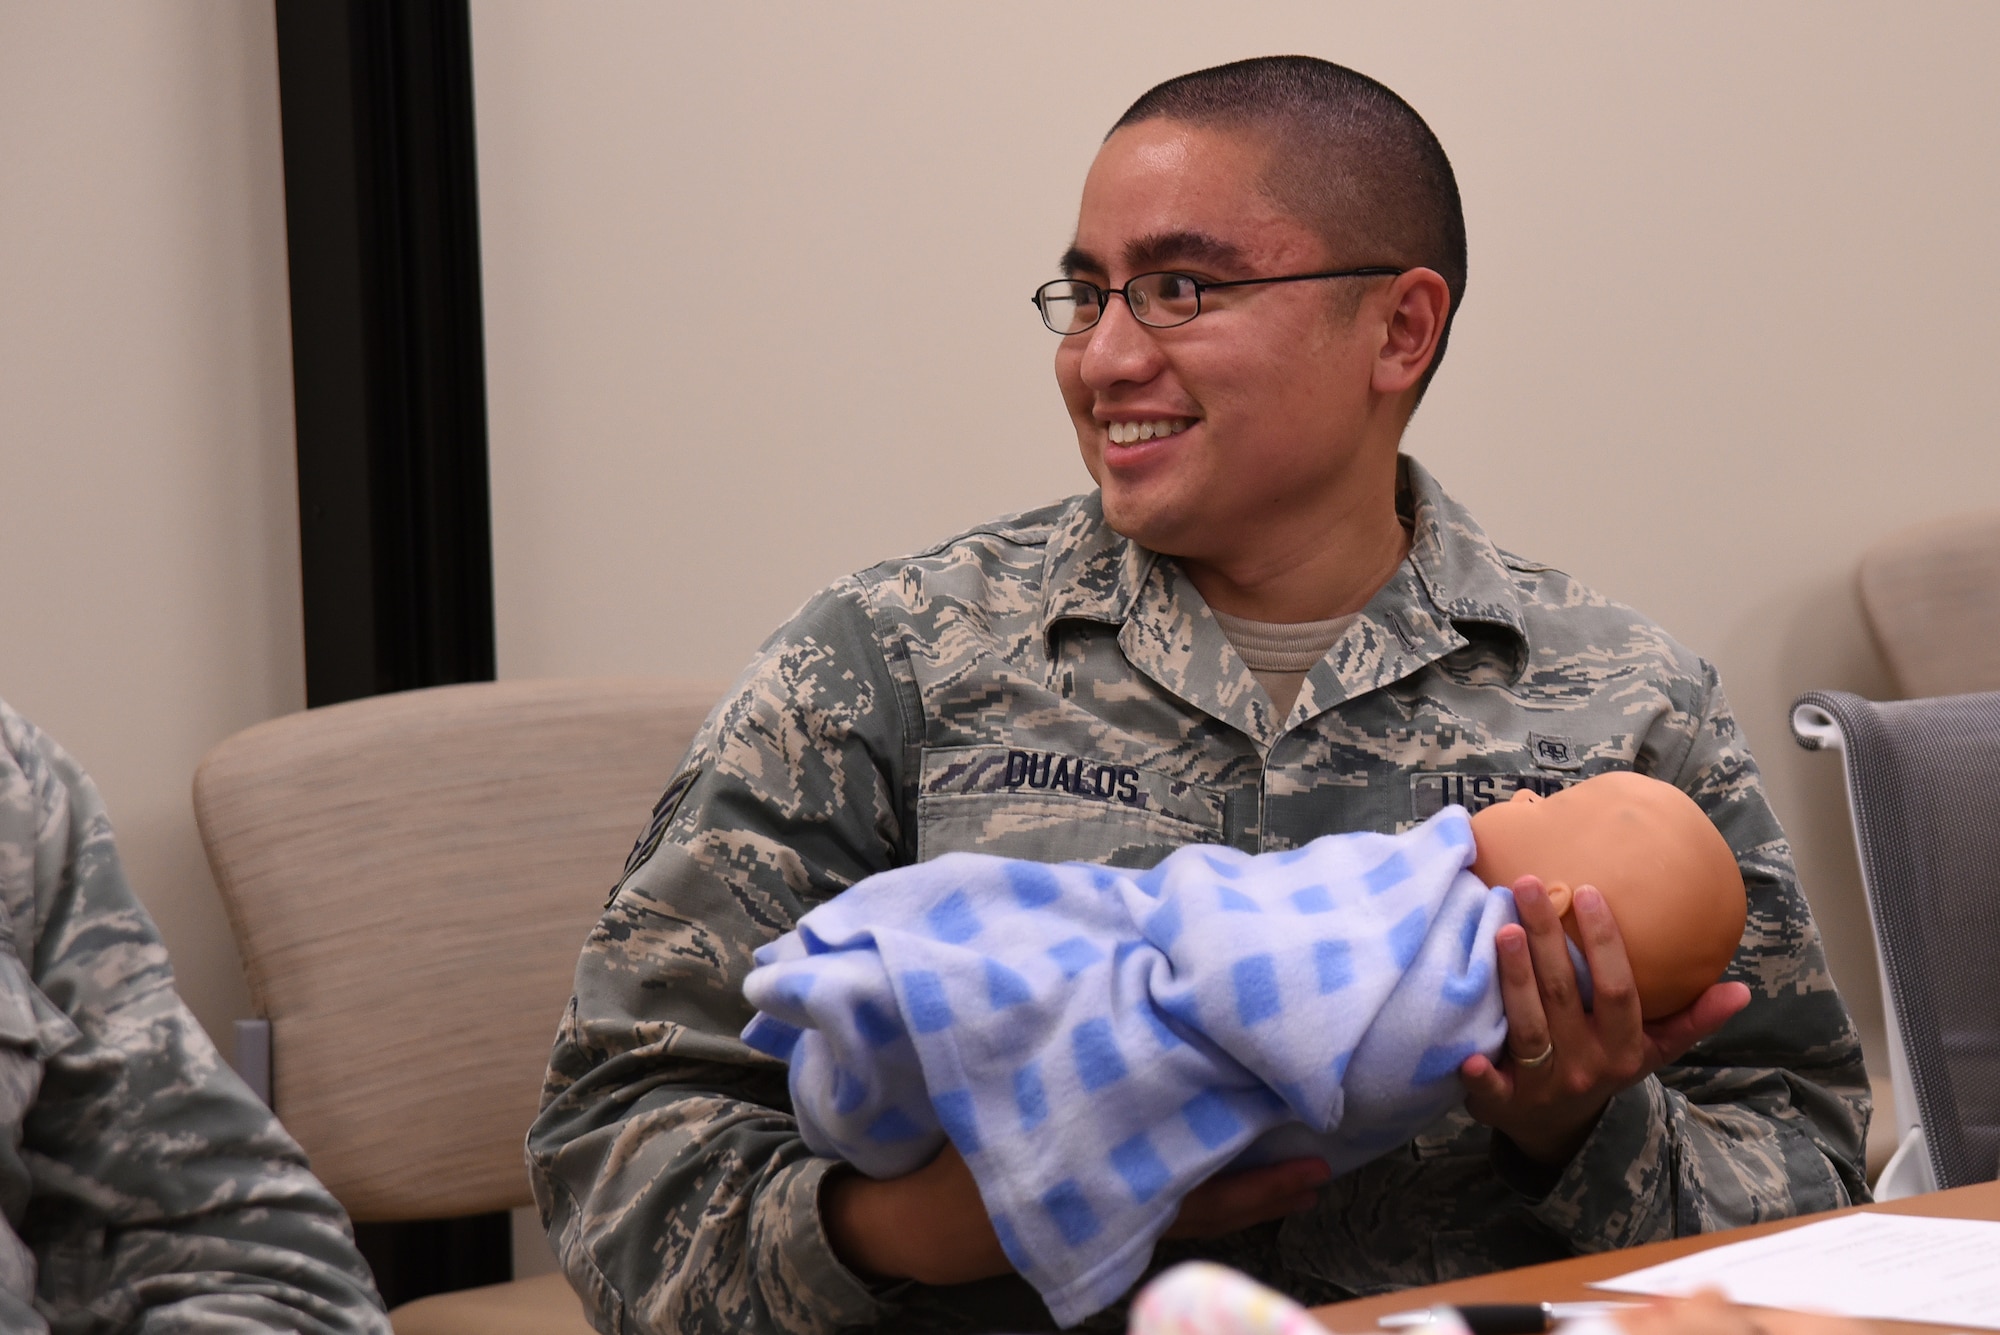 U.S. Air Force Staff Sgt. Mikel Dualos, 20th Medical Operations Squadron medical technician, holds a baby doll during a Dad’s 101 class at Shaw Air Force Base, S.C., April 13, 2018.